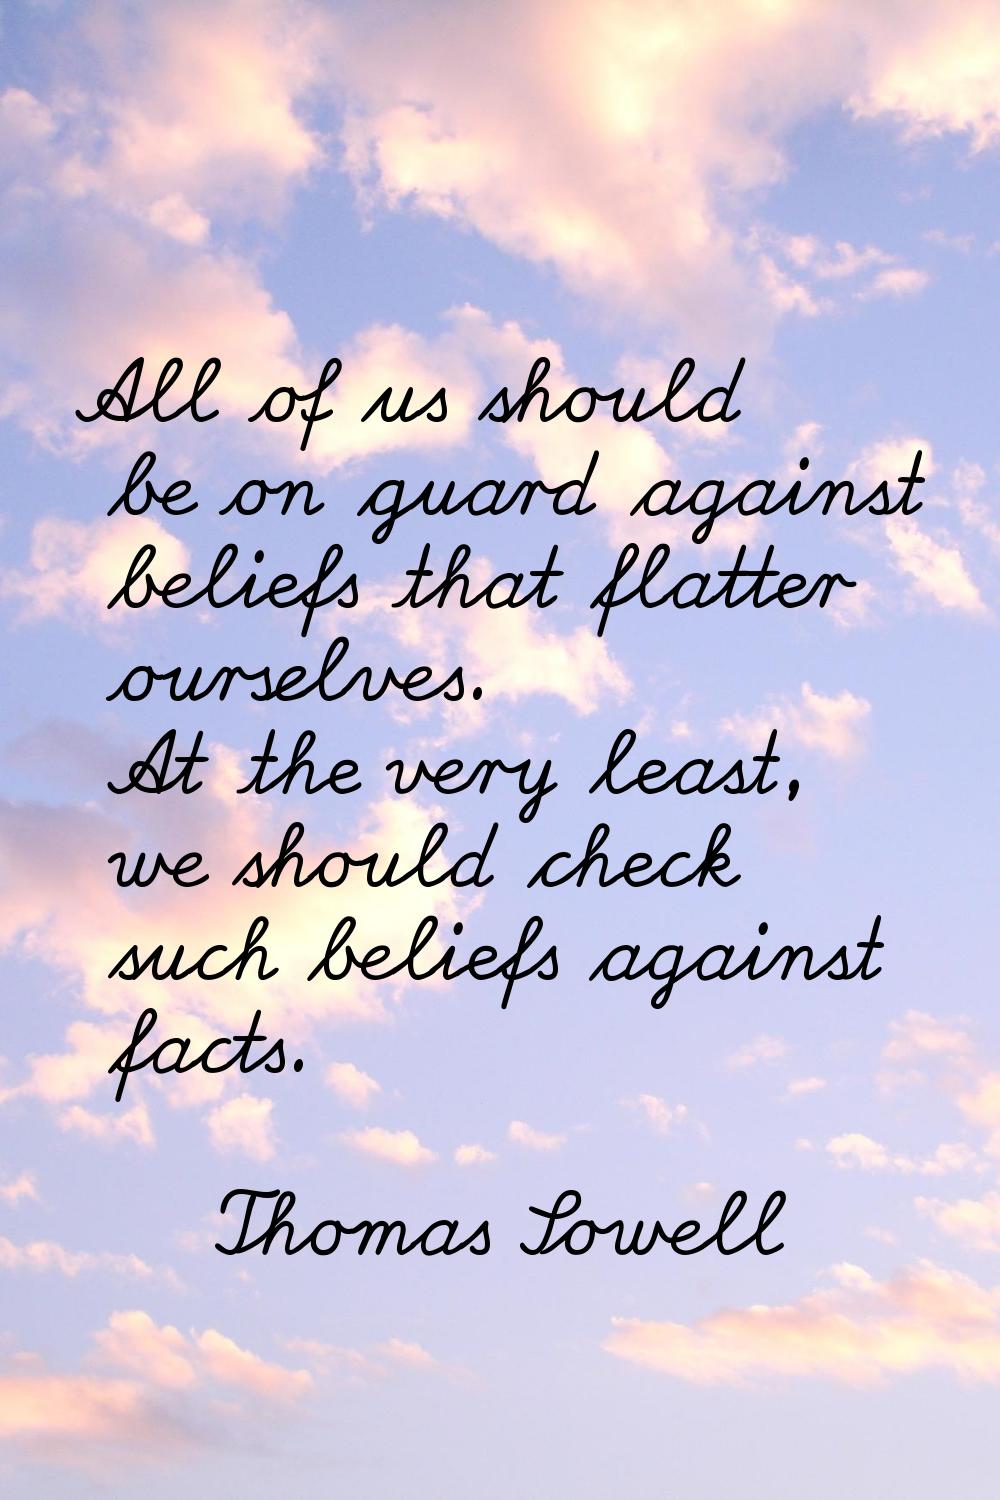 All of us should be on guard against beliefs that flatter ourselves. At the very least, we should c